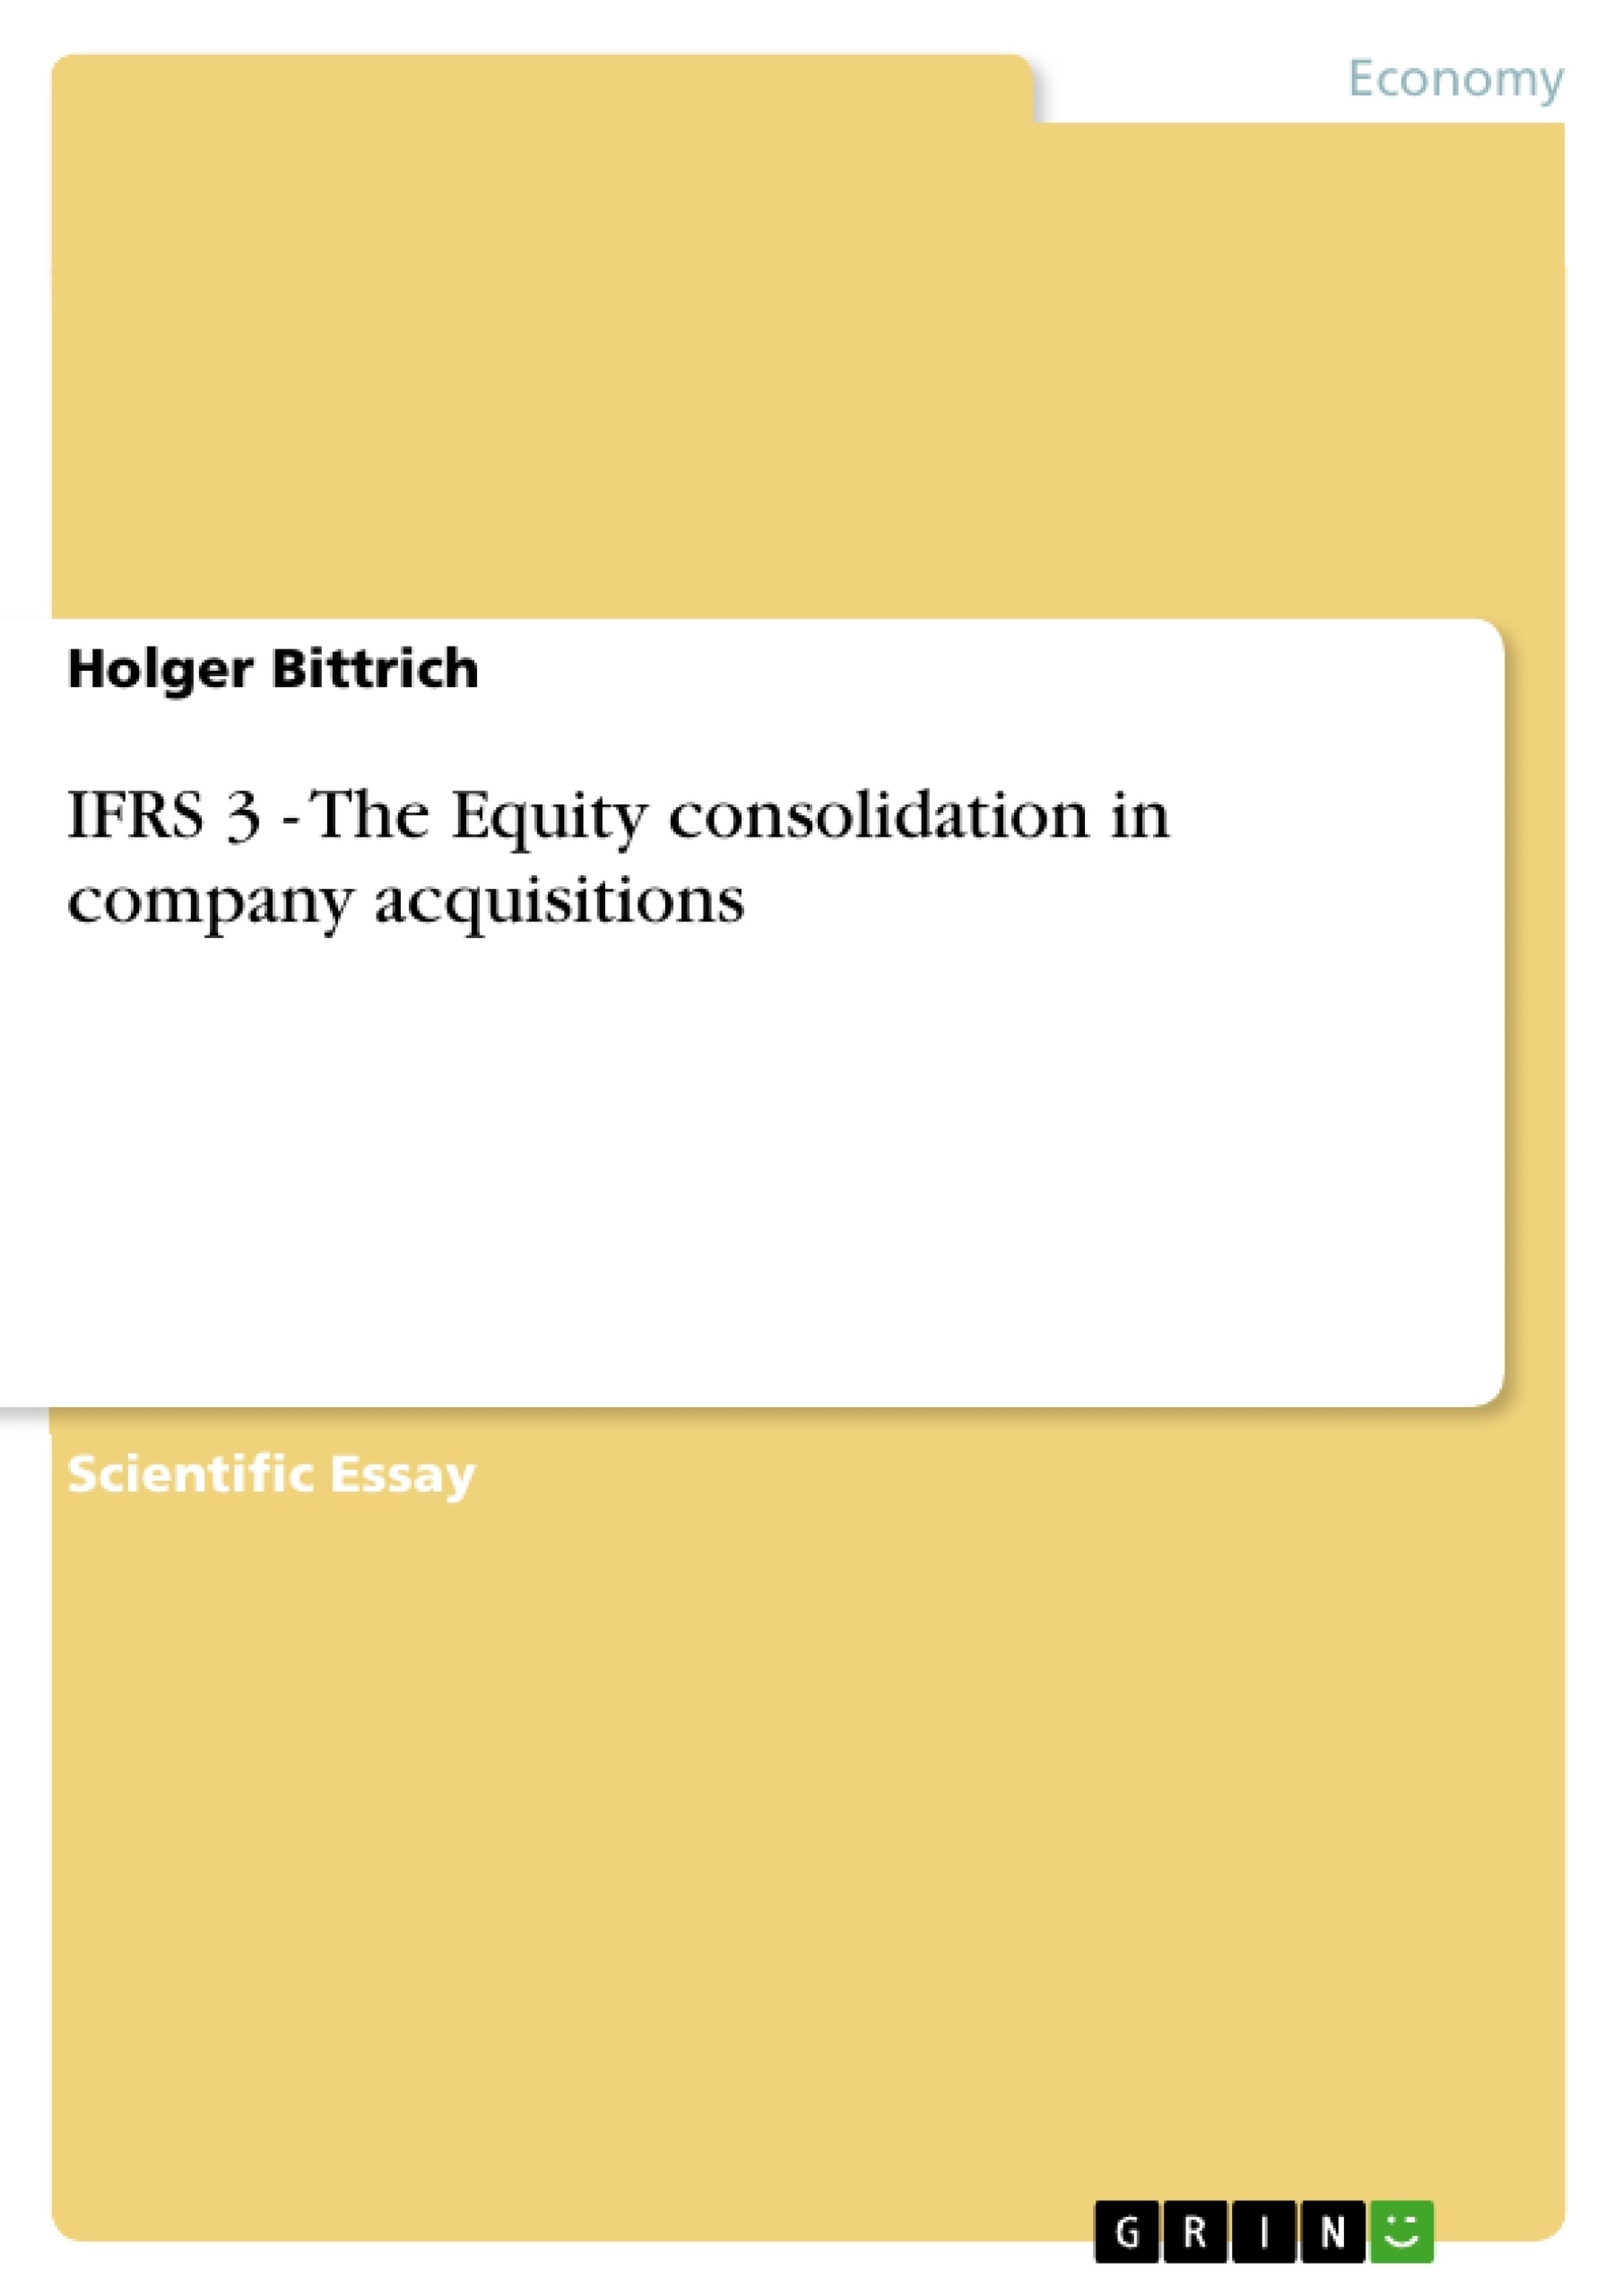 Titel: IFRS 3 - The Equity consolidation in company acquisitions